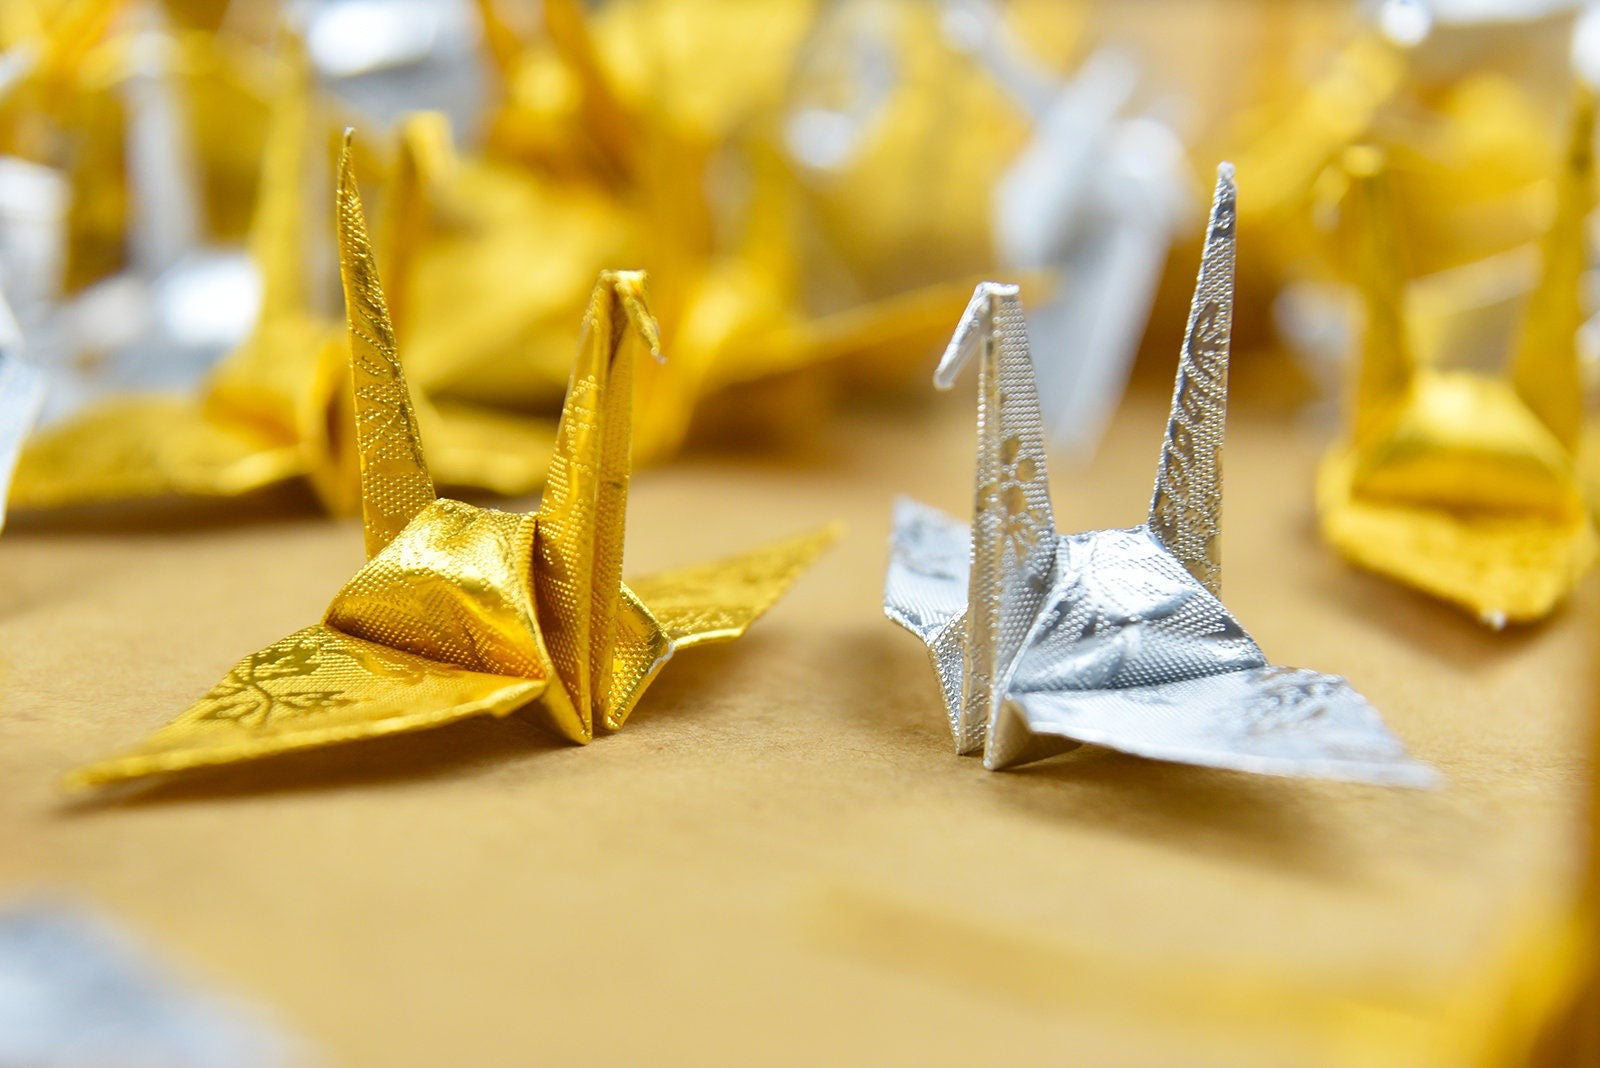 100 Origami Cranes Gold and Silver with Rose Pattern 7.5cm (3 inches) for Wedding Decoration, Japanese Wedding